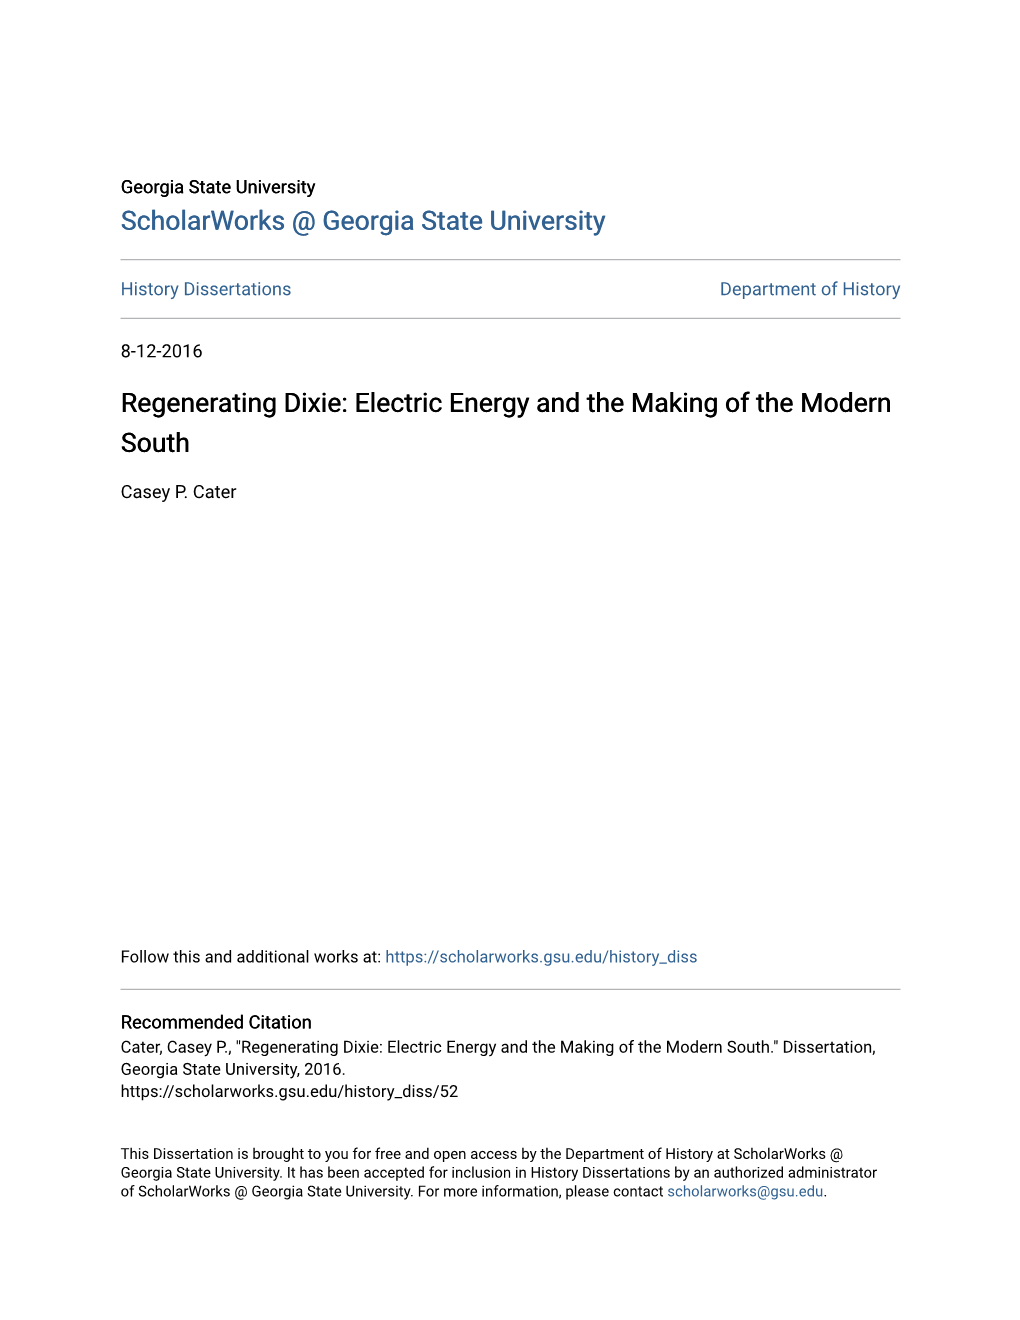 Regenerating Dixie: Electric Energy and the Making of the Modern South